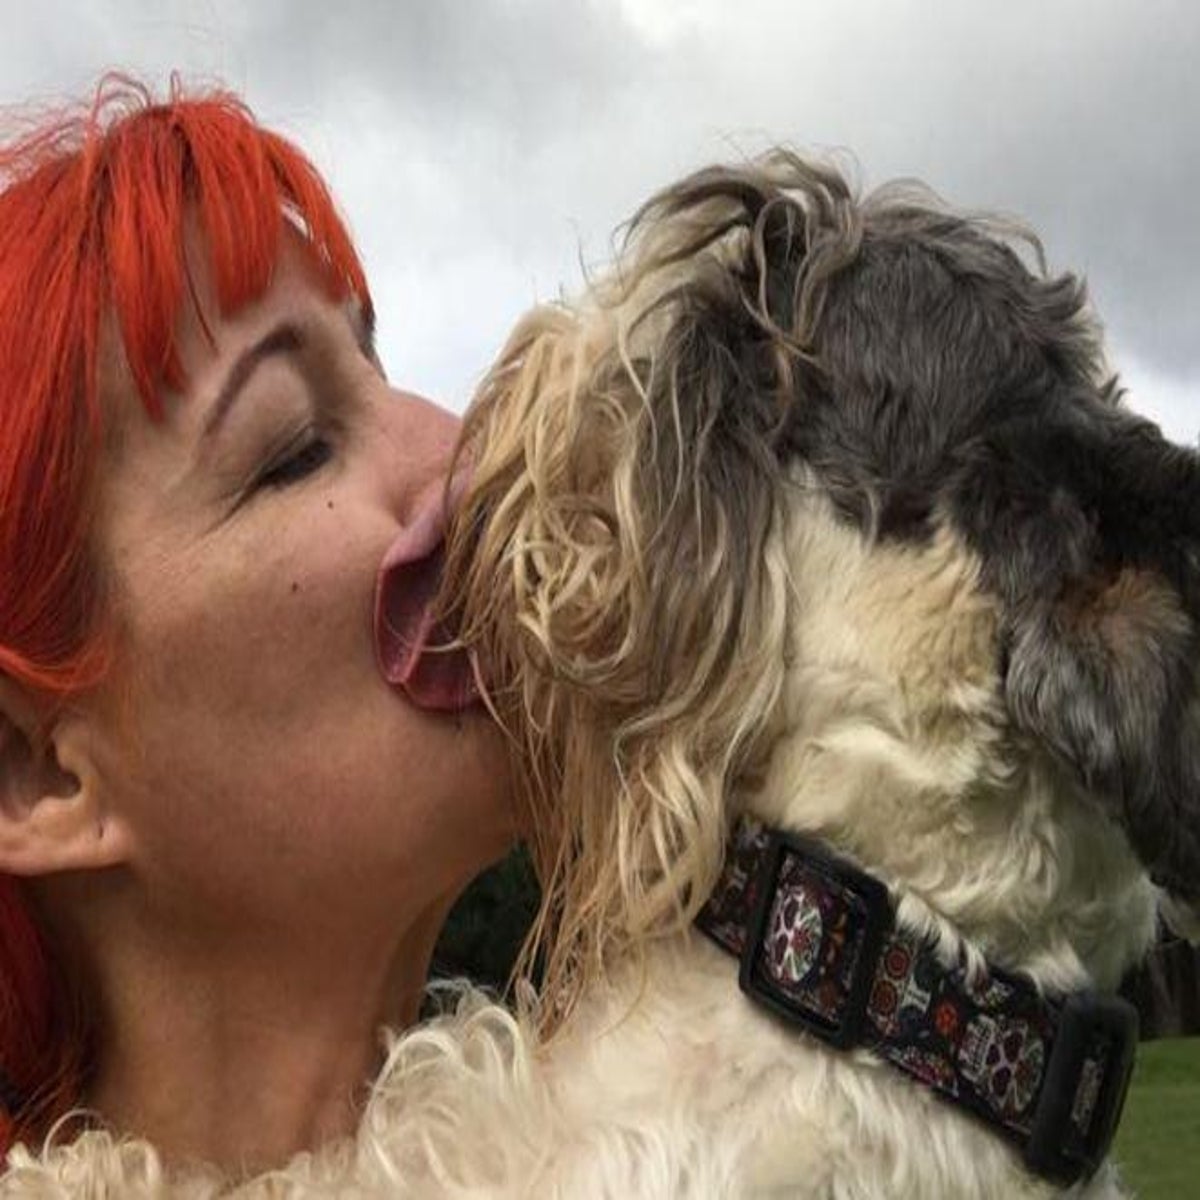 Oldage Womans Sex With Animals Xxx Porn - Woman who married dog eight years ago says he's 'perfect' for her | The  Independent | The Independent